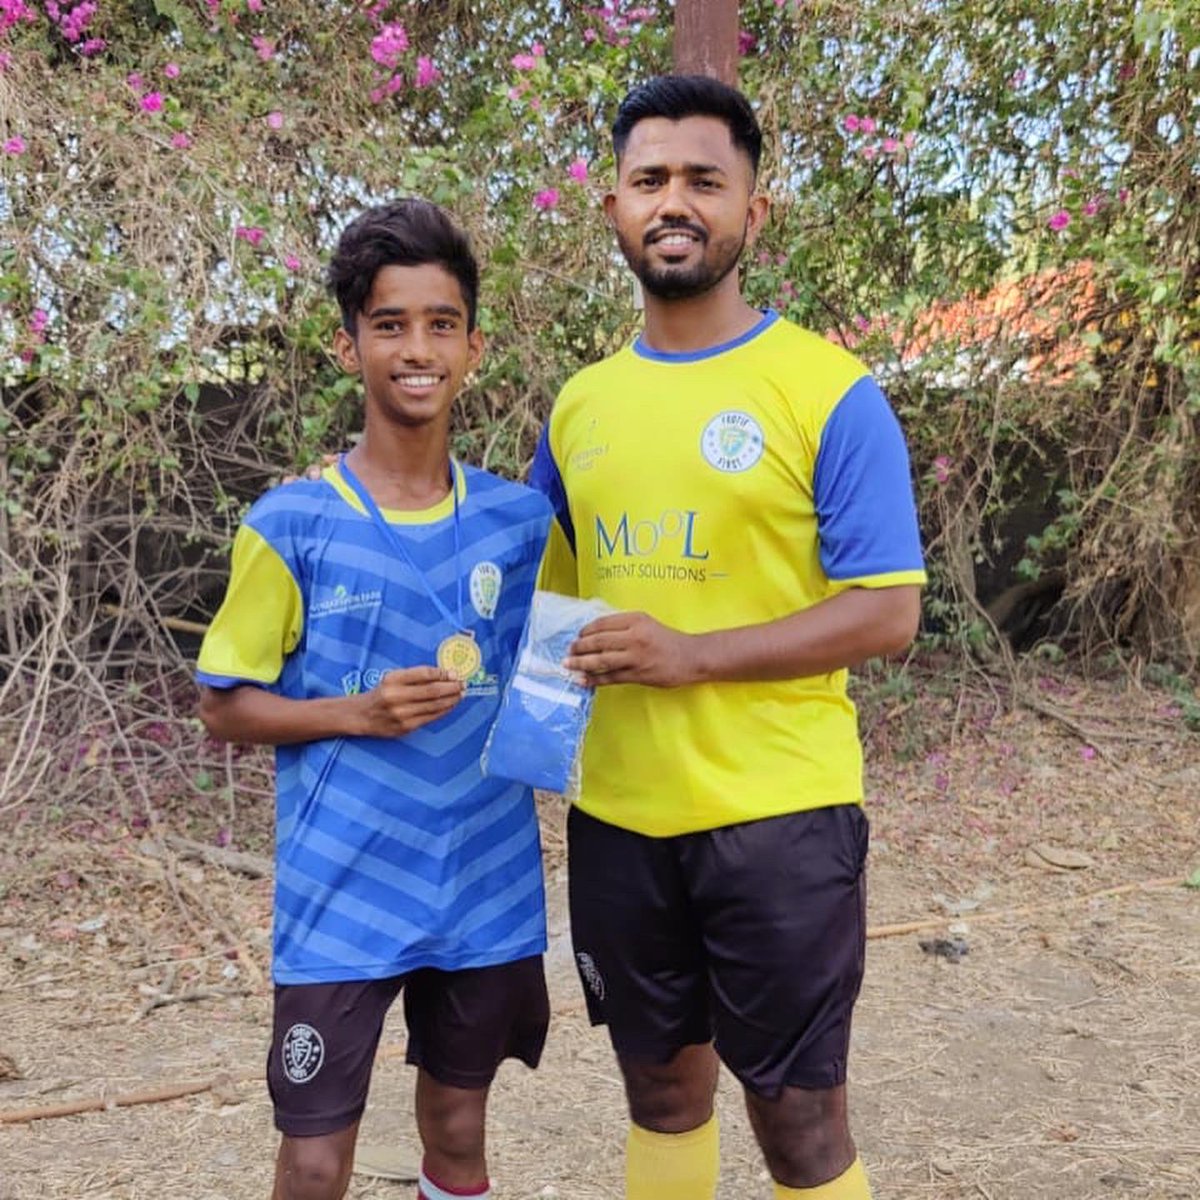 “Let your light shine so brightly that others can see their way out of the dark”

Put your hands together for our Players of the Month!👏🏼👏🏼👏🏼

#FootballForAll #FootballForGood #WeLoveFootball